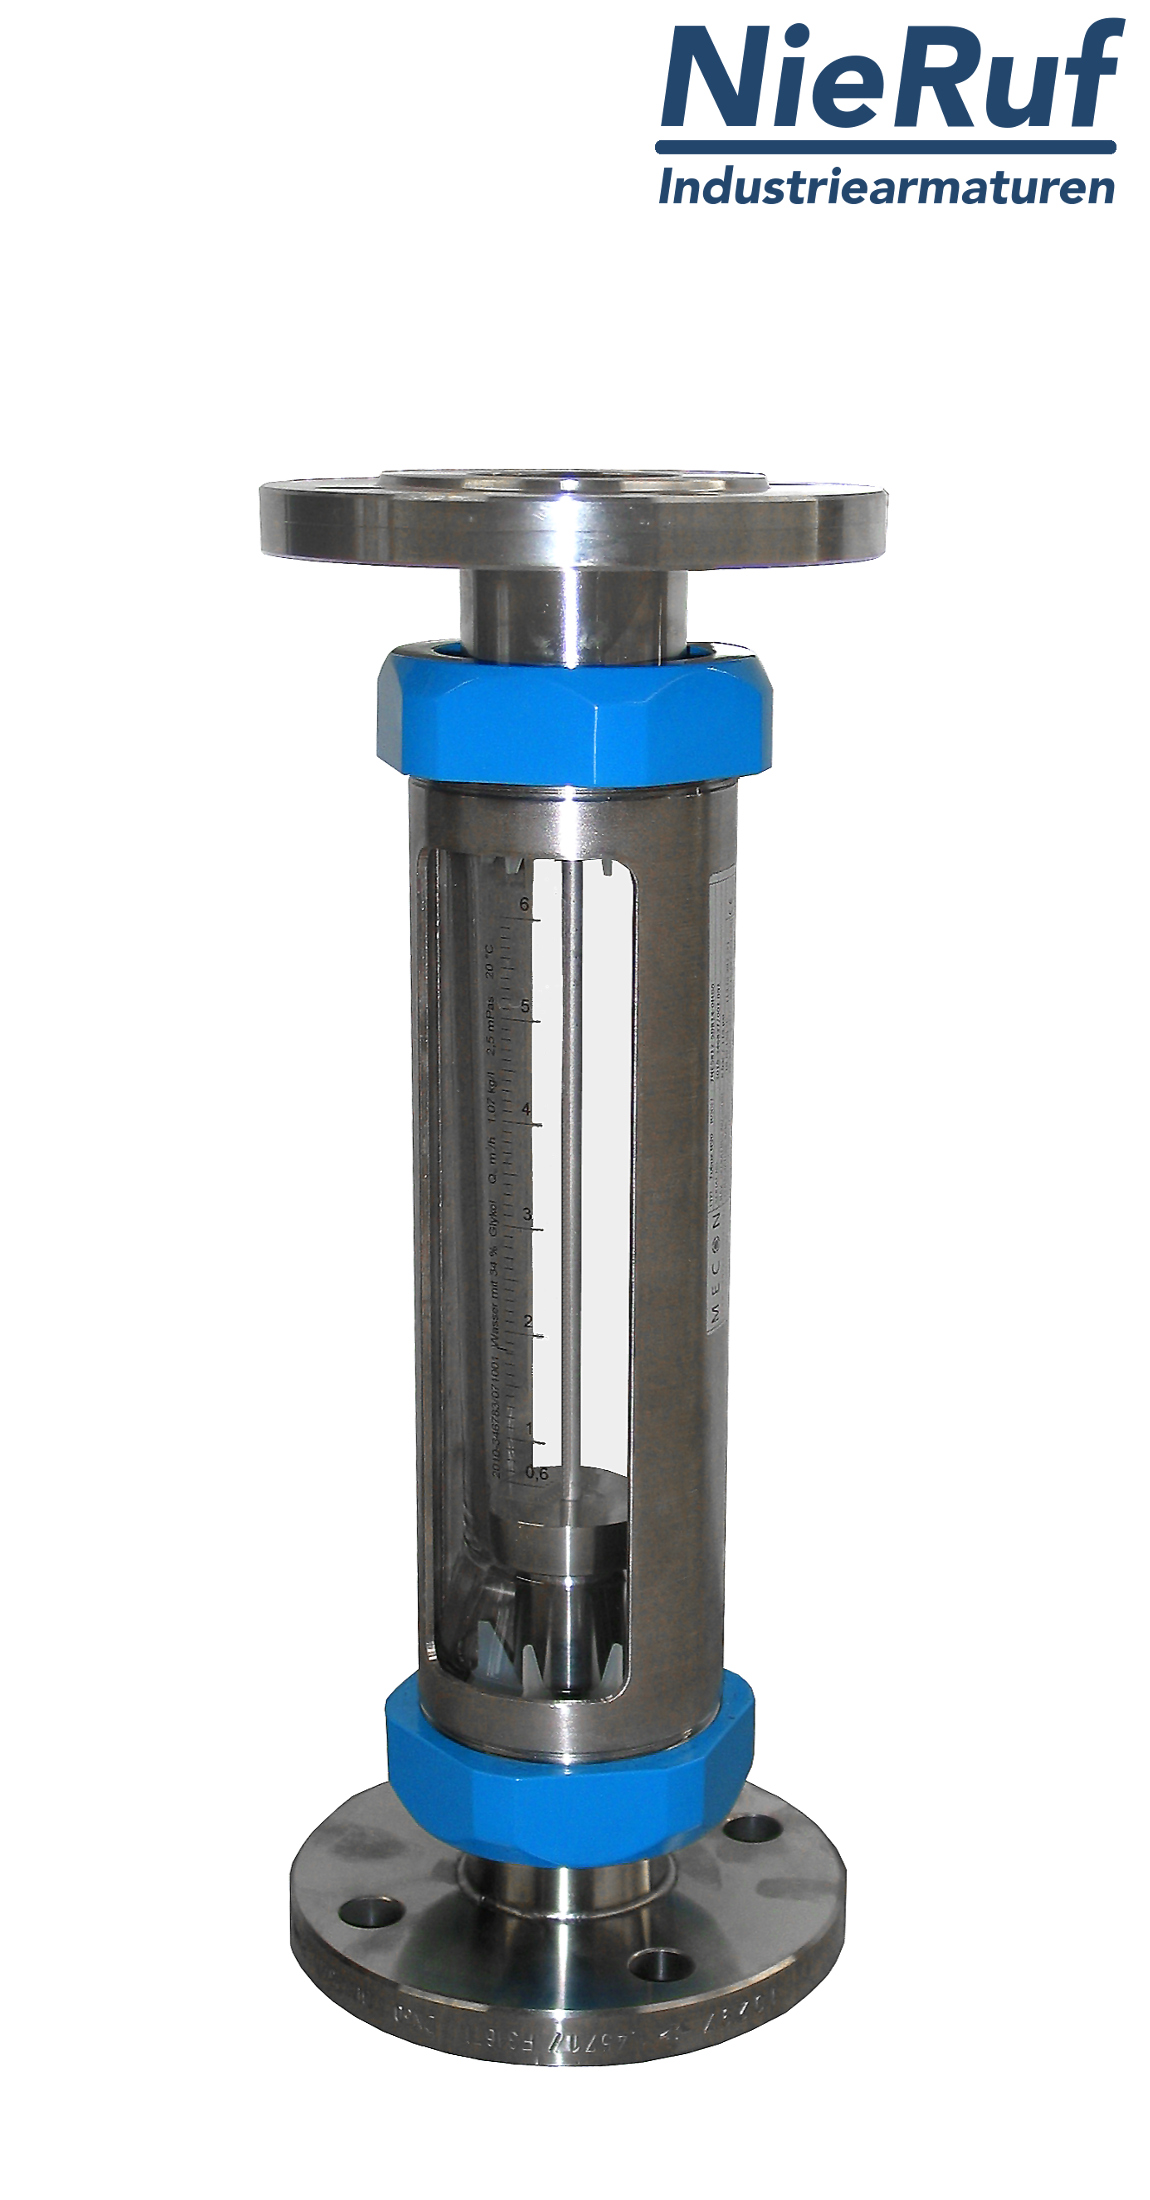 Variable area flowmeter stainless steel + borosilicate flange DN32 100.0 - 1000 l/h water FKM